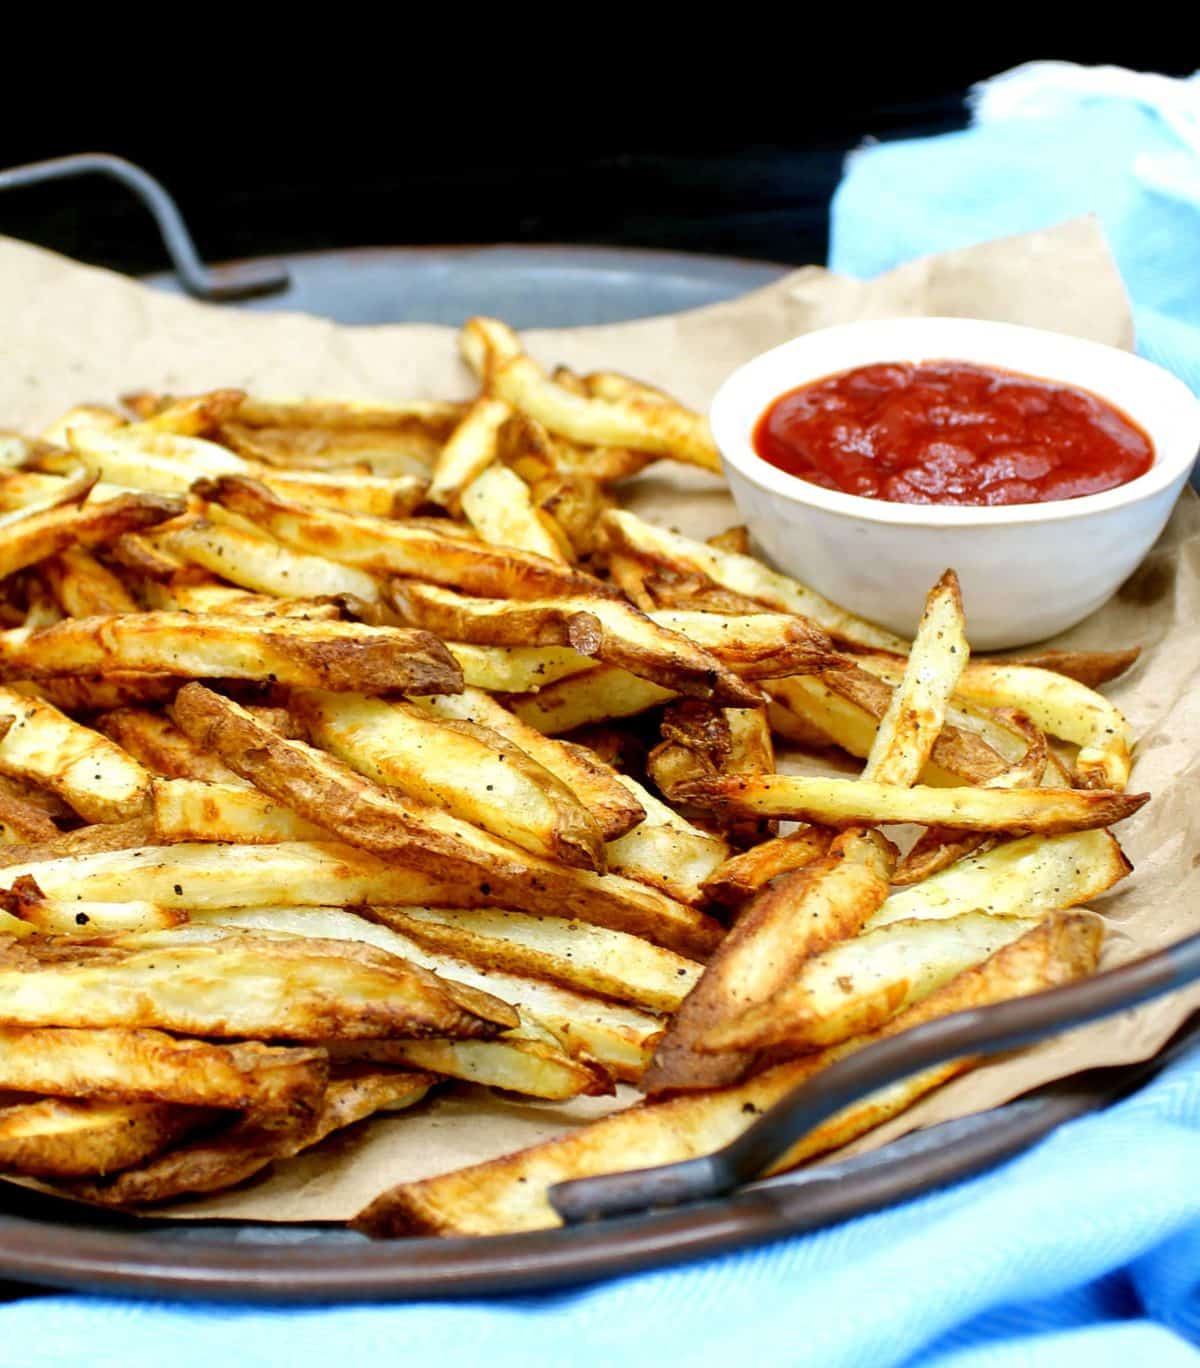 A front closeup of air fryer French fries, golden and crispy, on brown paper. These are made with very little oil or no oil. Next to the fries is a white ceramic bowl with tomato ketchup.